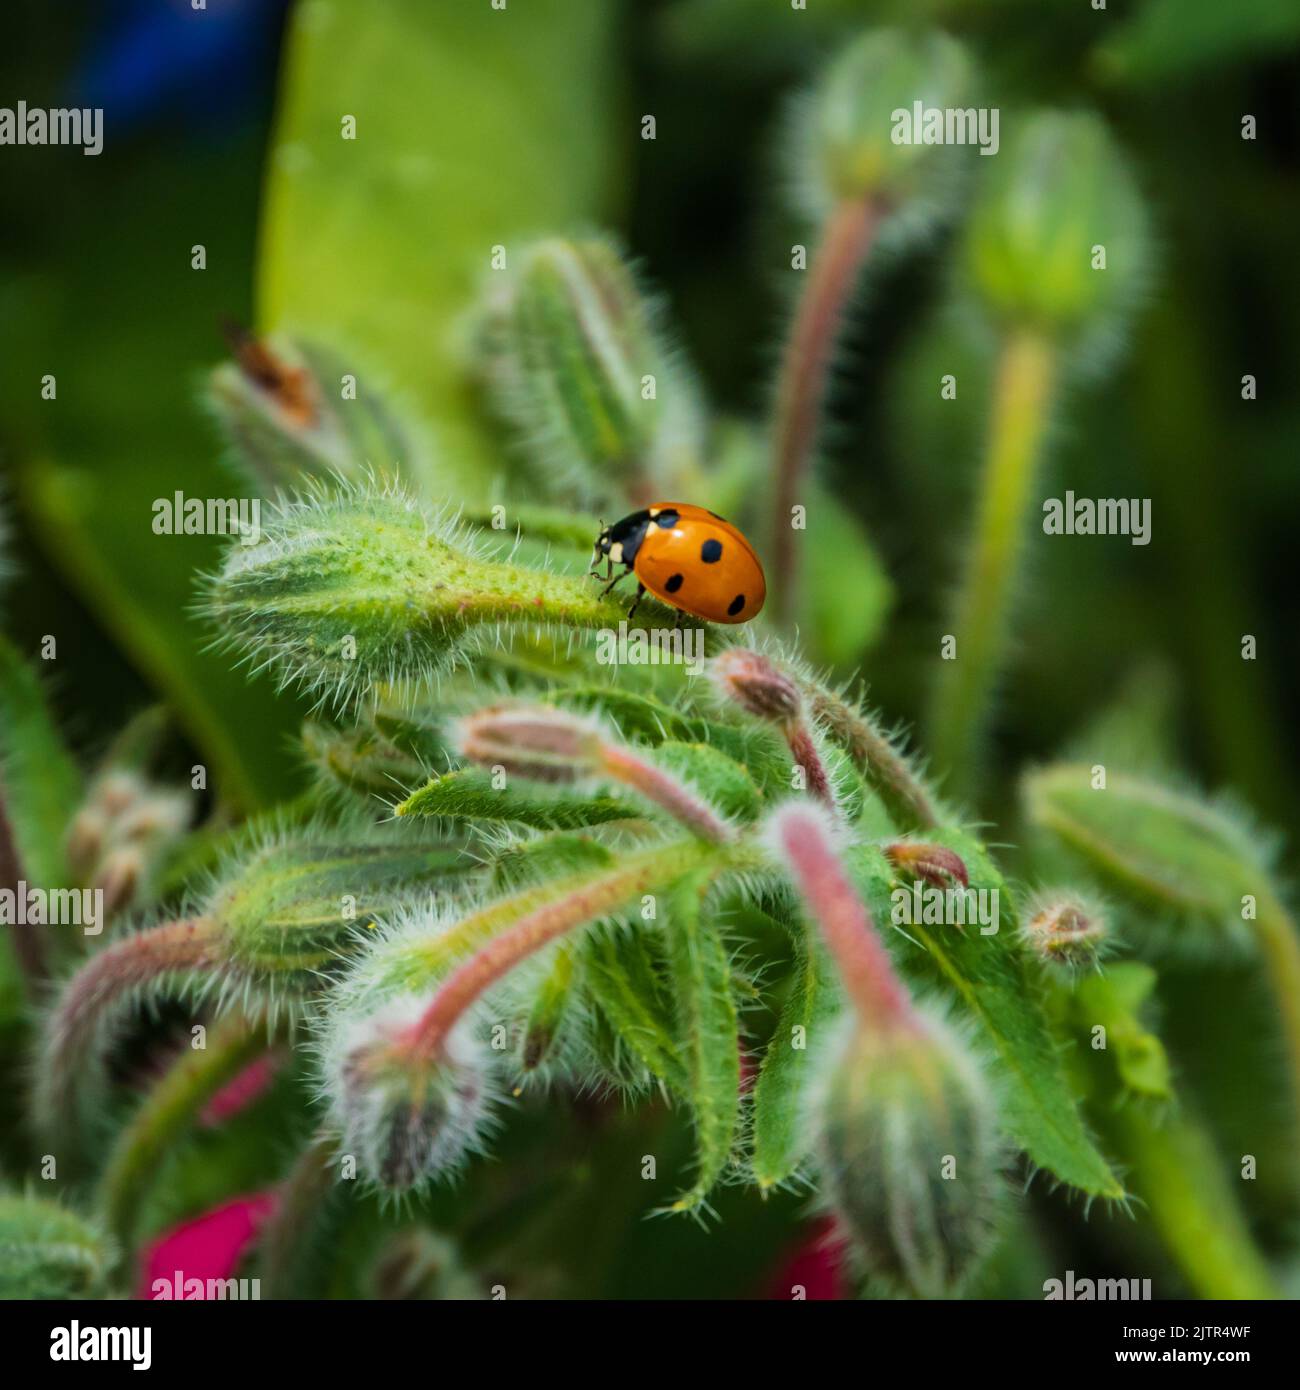 ladybug insect on borage plant in a herbal garden Stock Photo